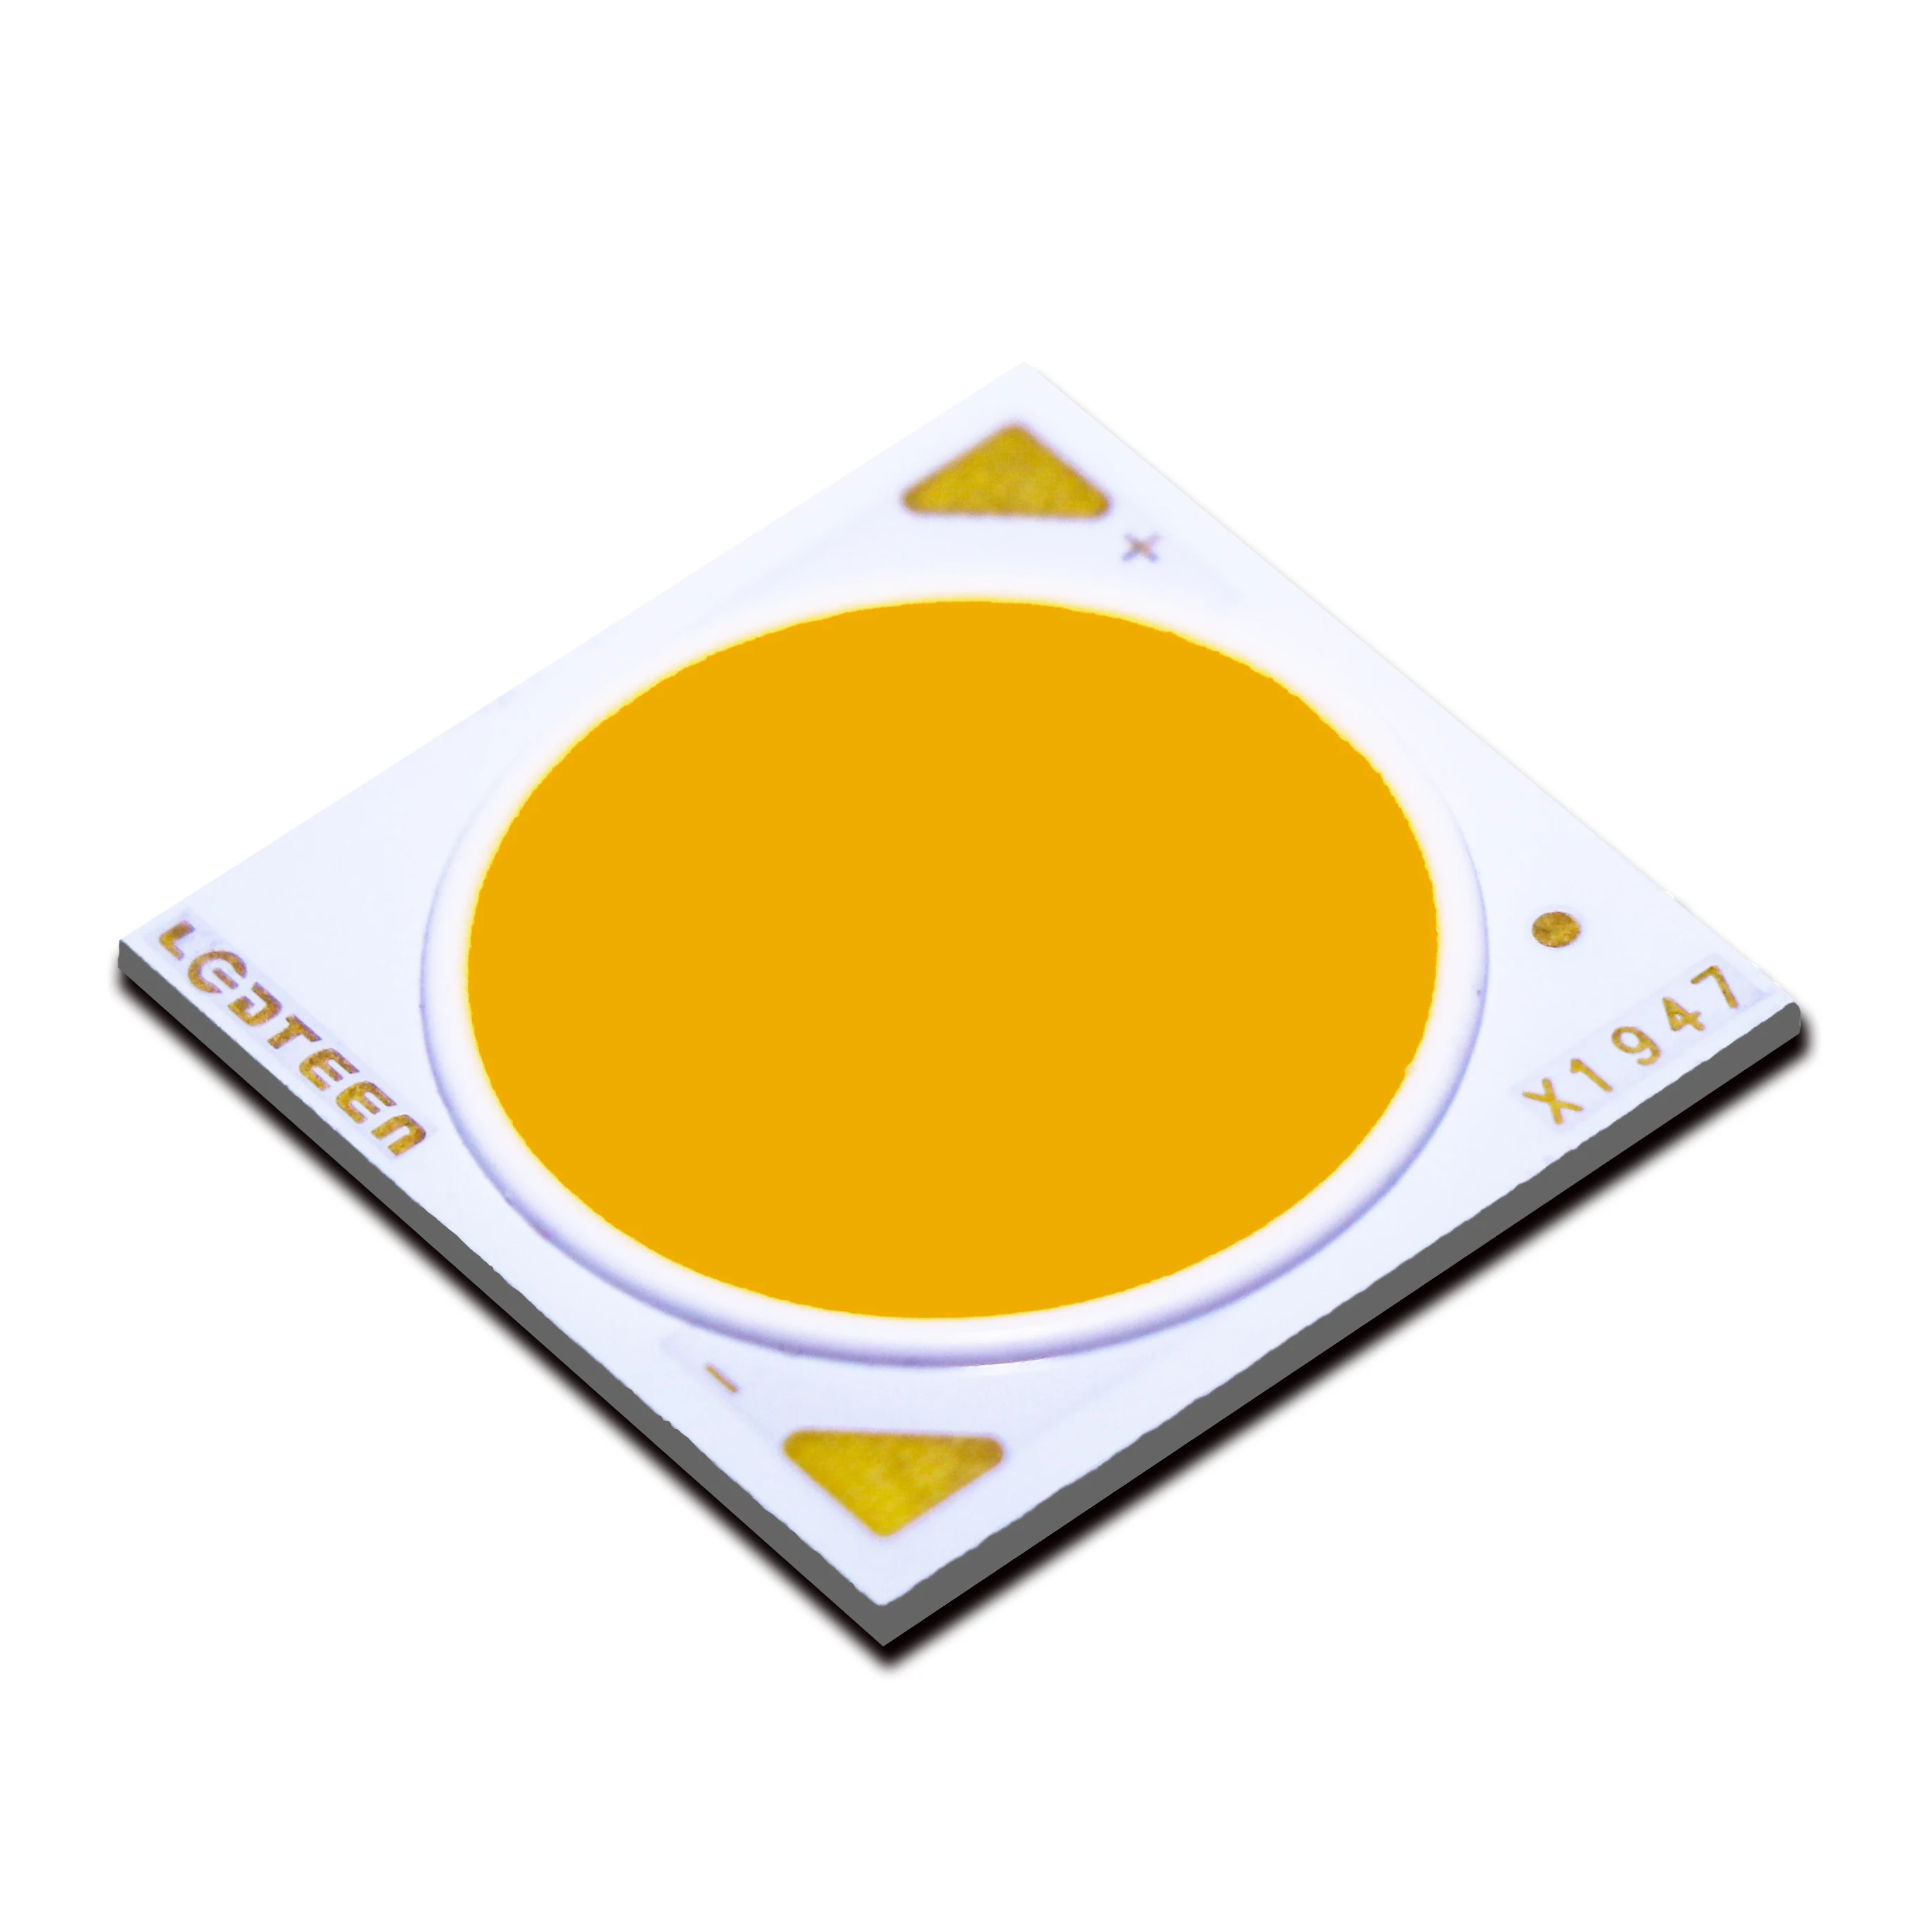 new chip on board Led chip 25-60W cob led module